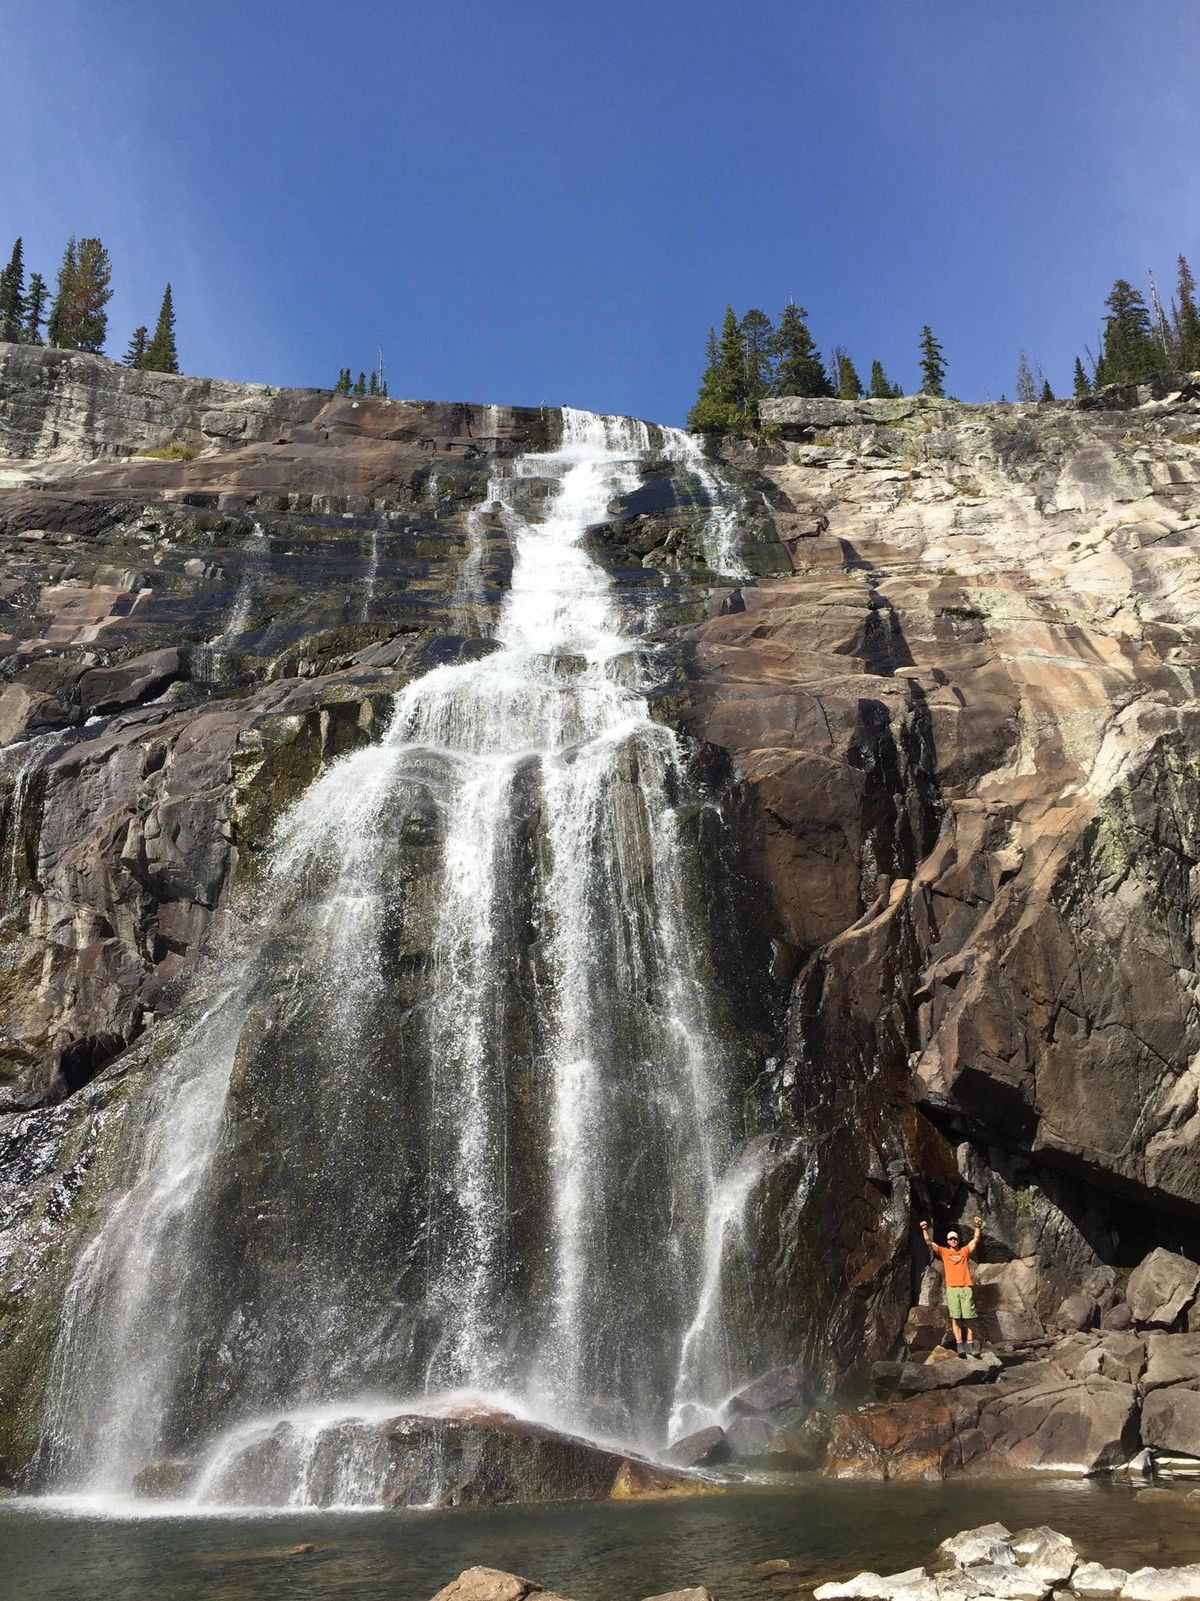 Impasse Falls is one of the most dramatic waterfalls along the Beaten Path, a 26-mile hiking trail that crosses through Montana